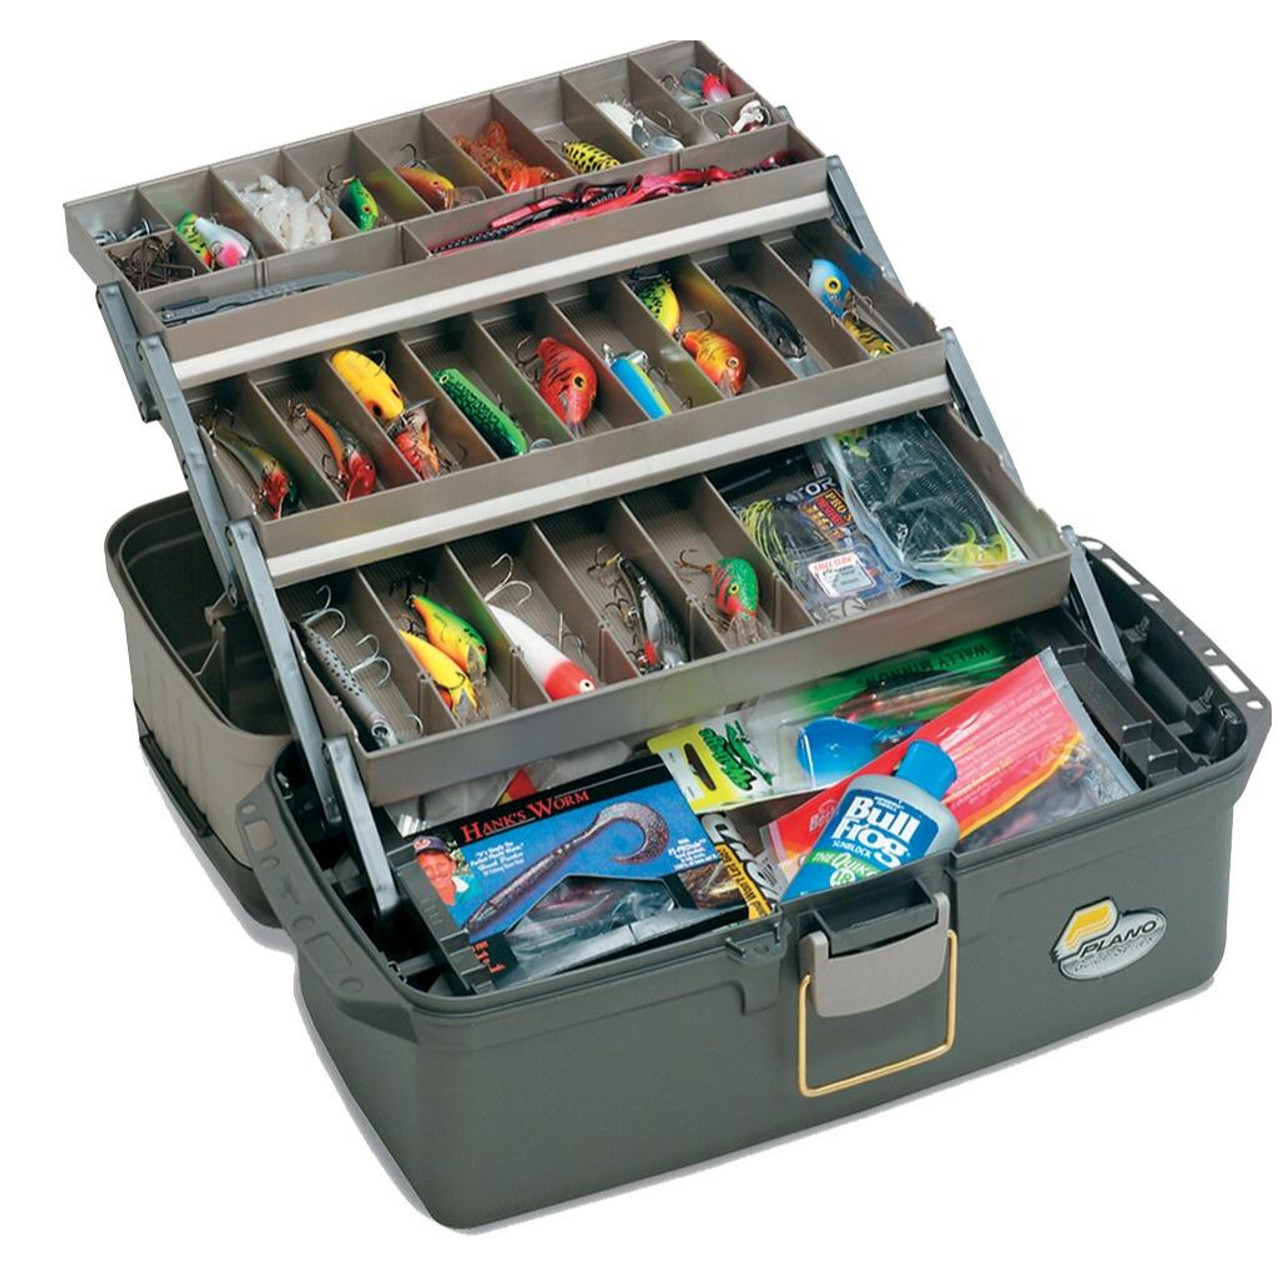 Plano Guide Three Tray with Top Access - Presleys Outdoors